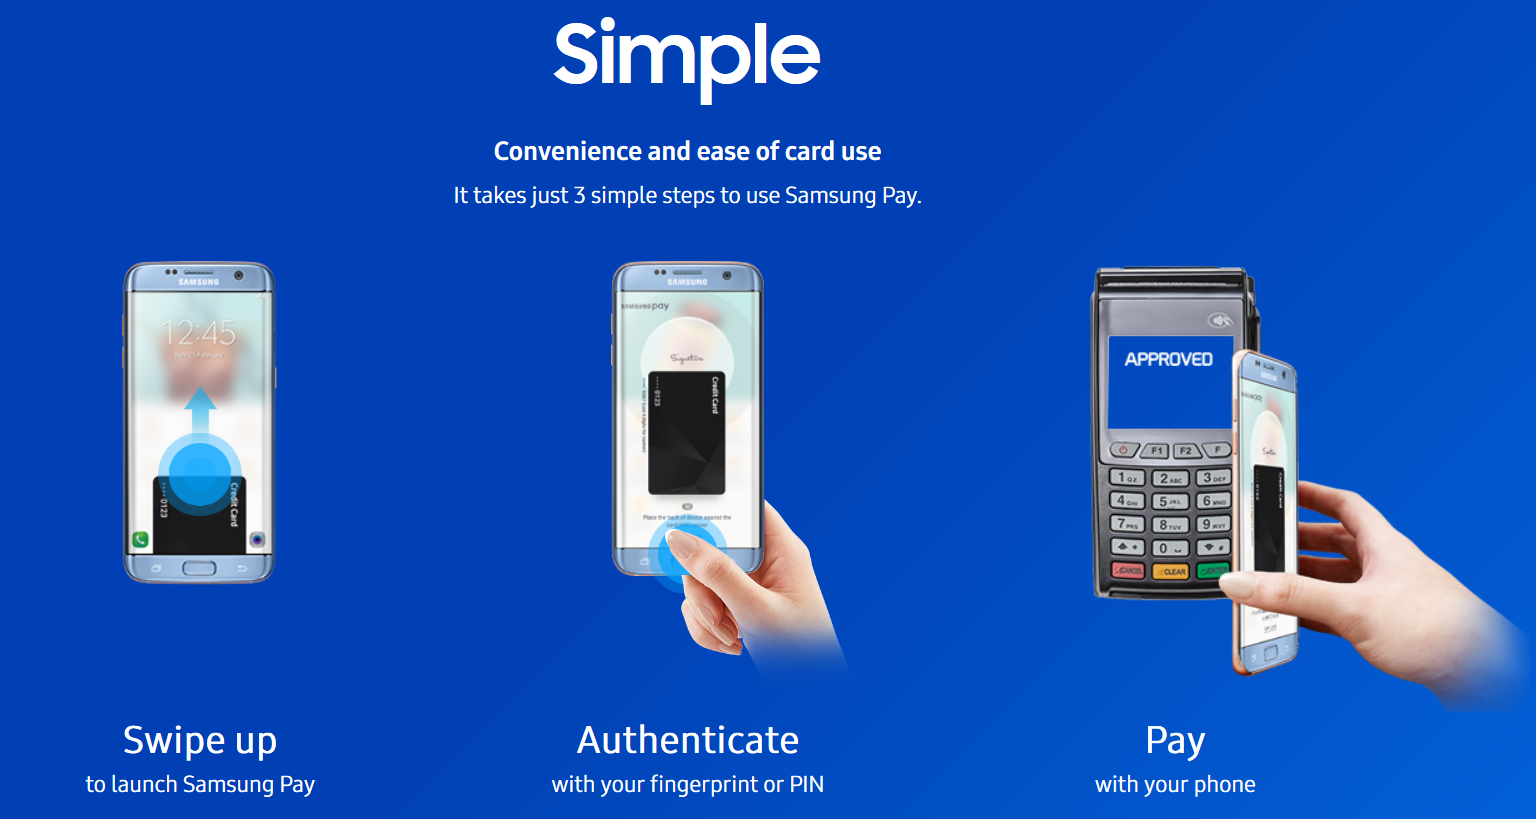 Samsung Pay in India